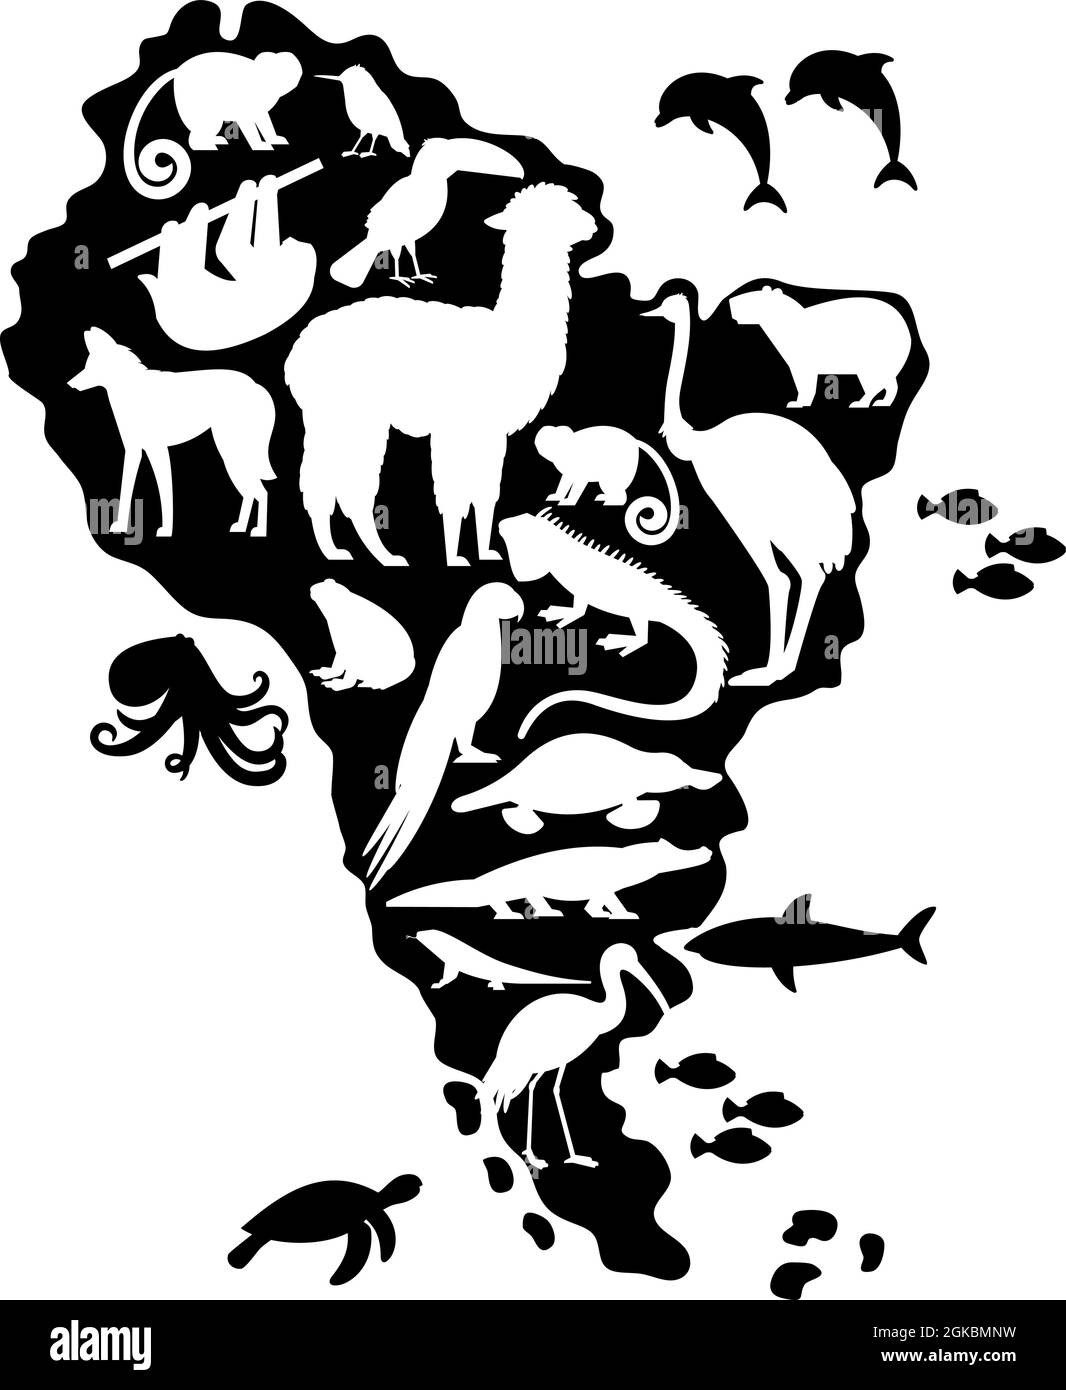 Silhouettes of Animals and Birds on South America Map Stock Vector